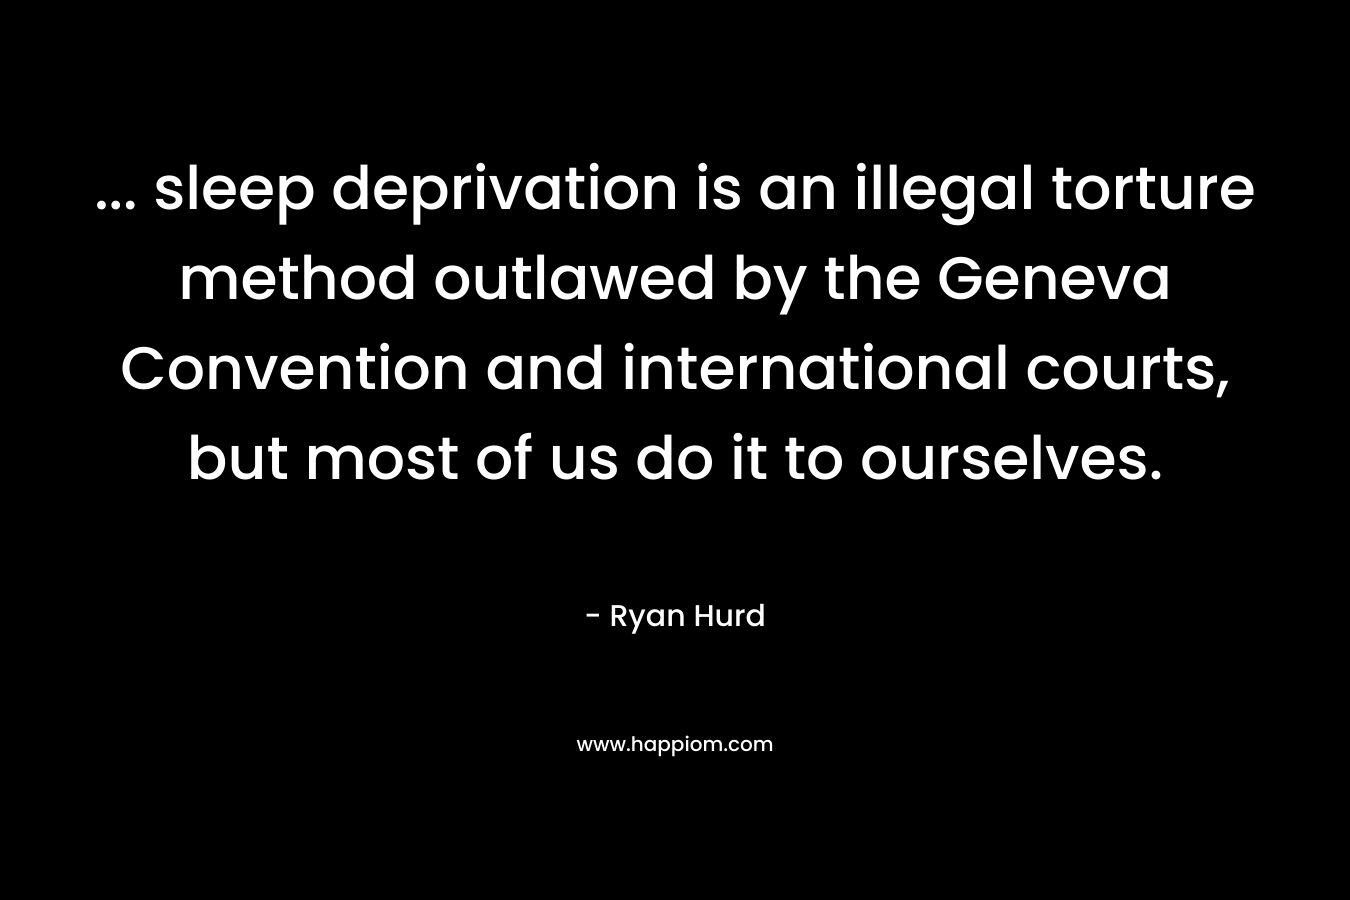 … sleep deprivation is an illegal torture method outlawed by the Geneva Convention and international courts, but most of us do it to ourselves. – Ryan Hurd